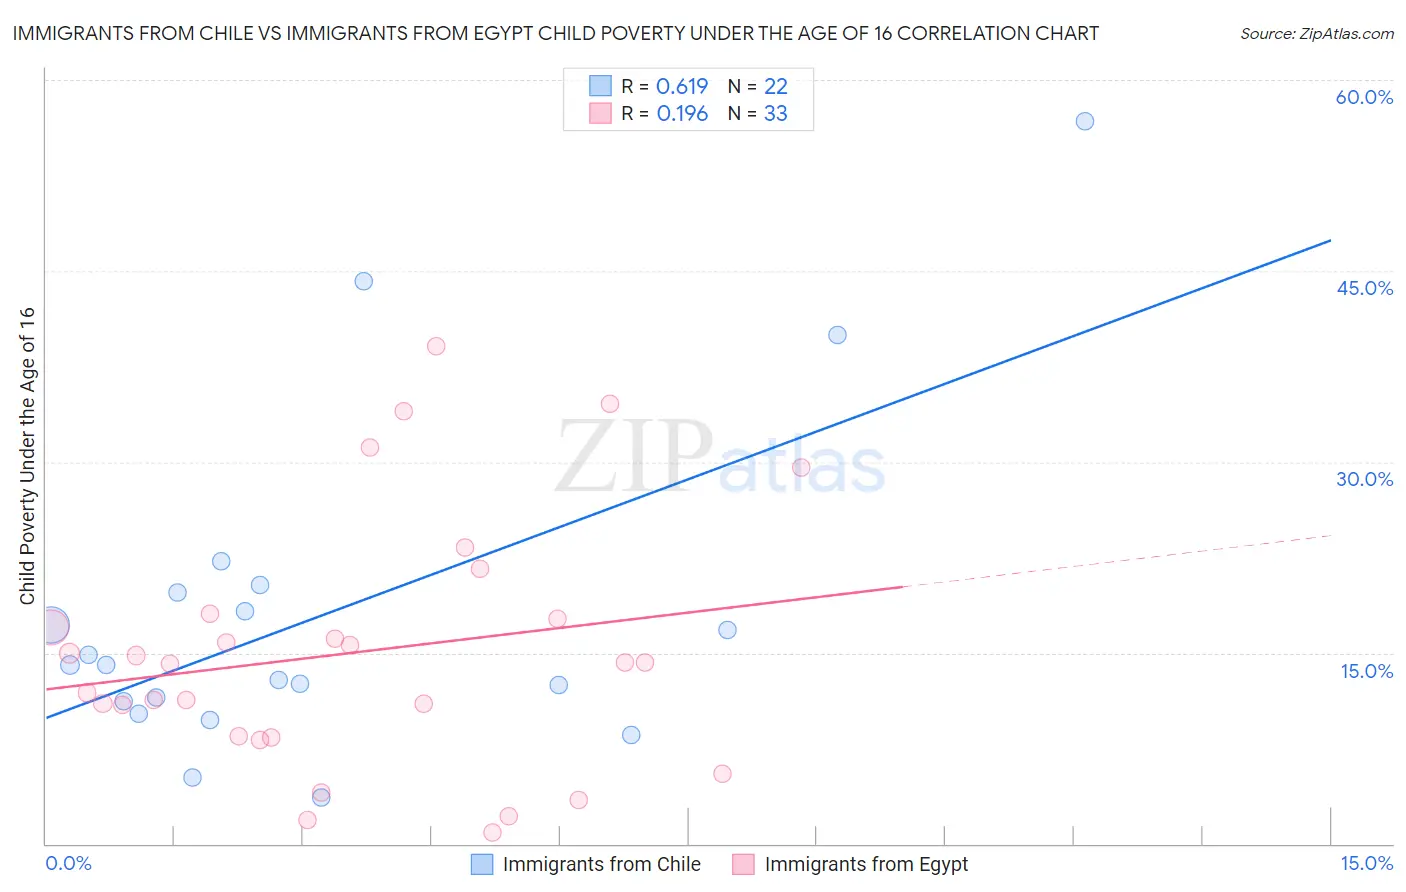 Immigrants from Chile vs Immigrants from Egypt Child Poverty Under the Age of 16